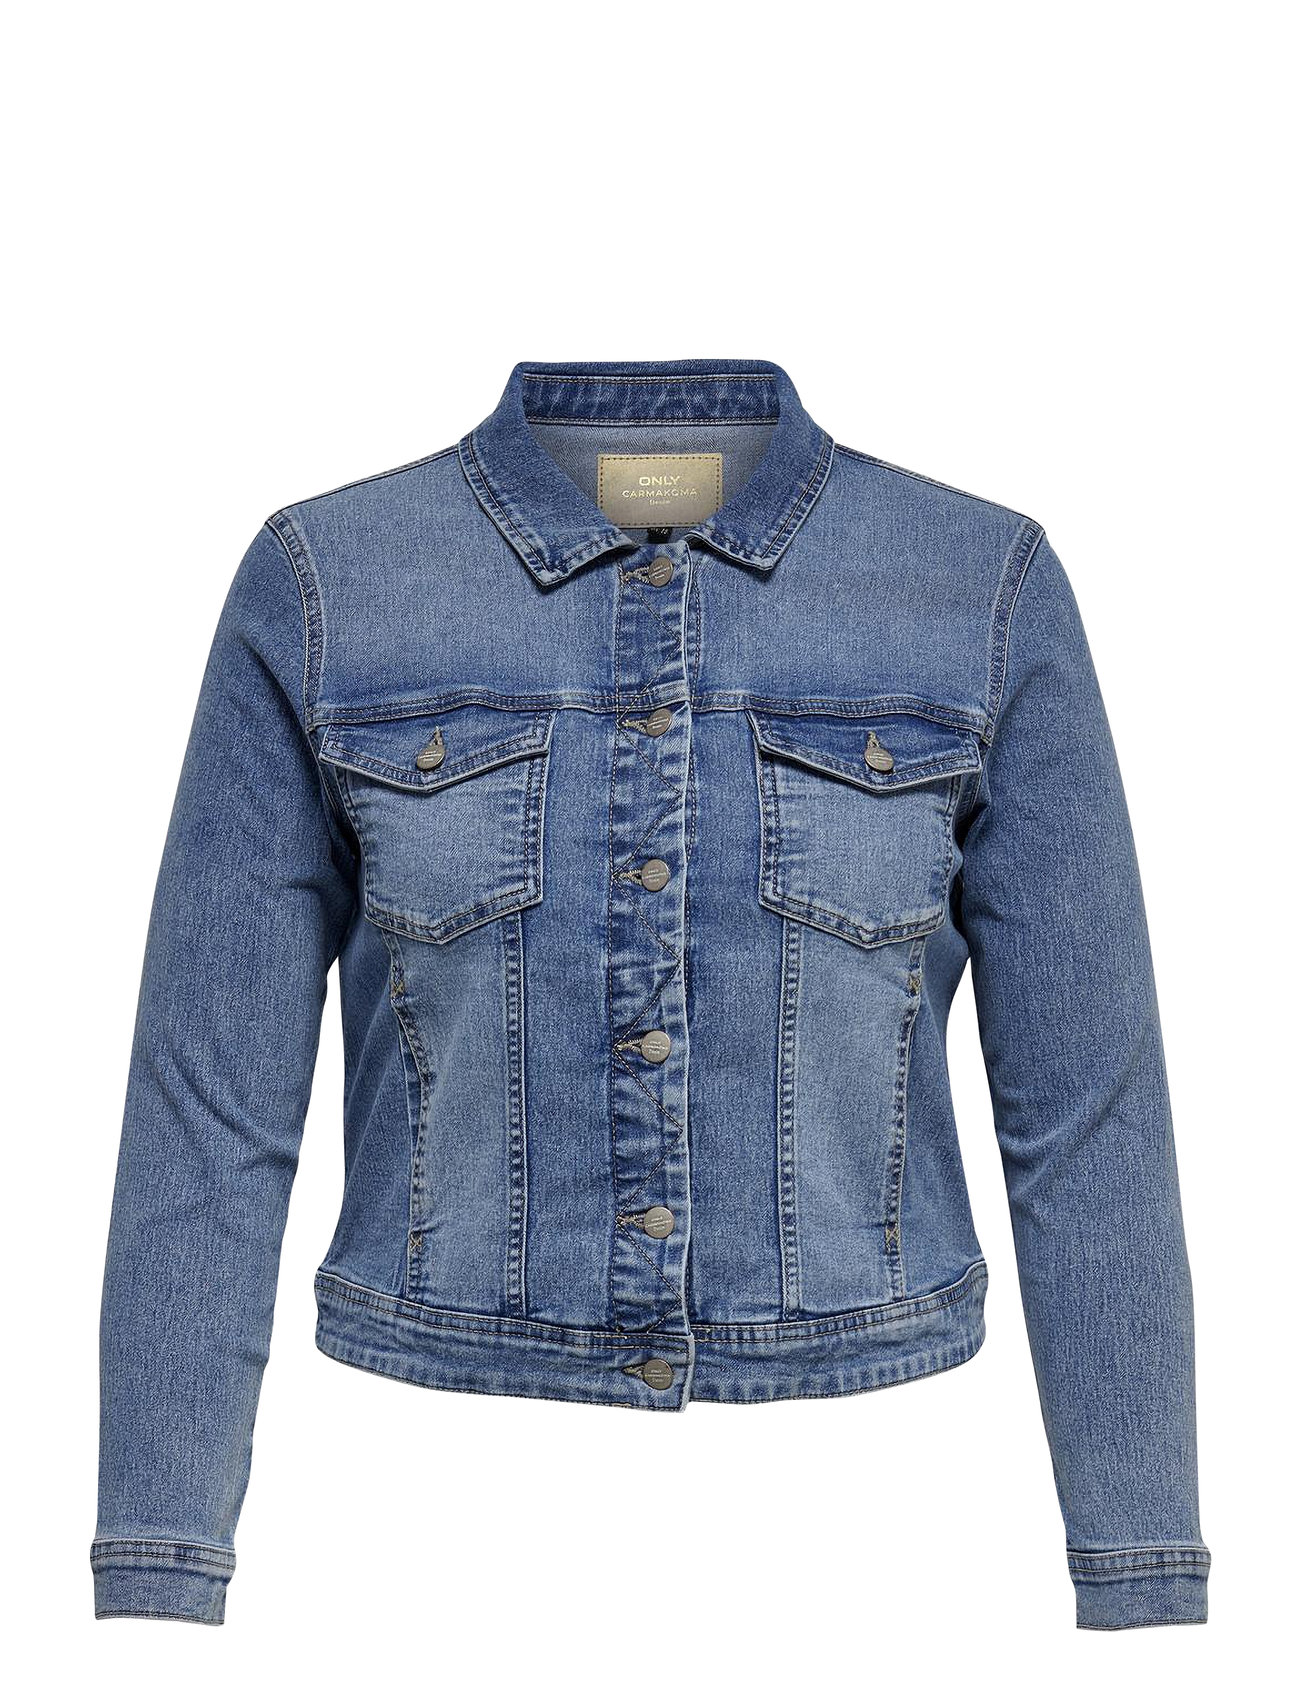 ONLY Carmakoma Carwespa Ls Jacket Light Blue Dnm Noos - 38.24 €. Buy Denim  jackets from ONLY Carmakoma online at Boozt.com. Fast delivery and easy  returns